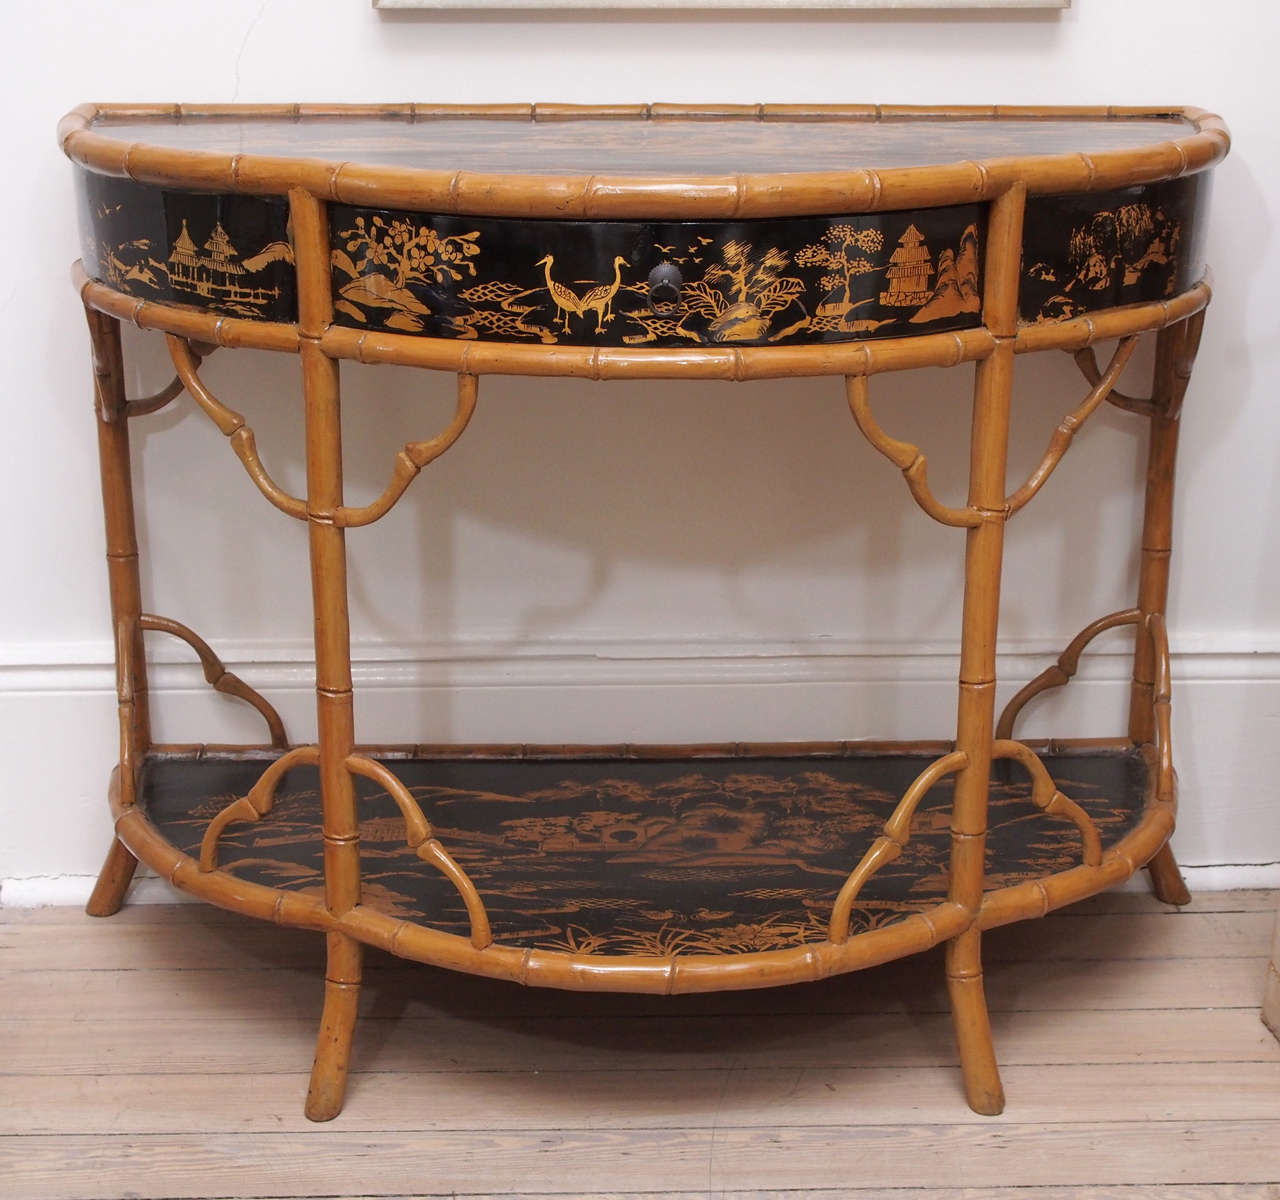 This charming pair of bamboo and chinoisserie console tables are from mid 19th century England.  The natural, camel colored bamboo frames a black chinoiserie painted table top, one pull out drawer and bottom shelf.